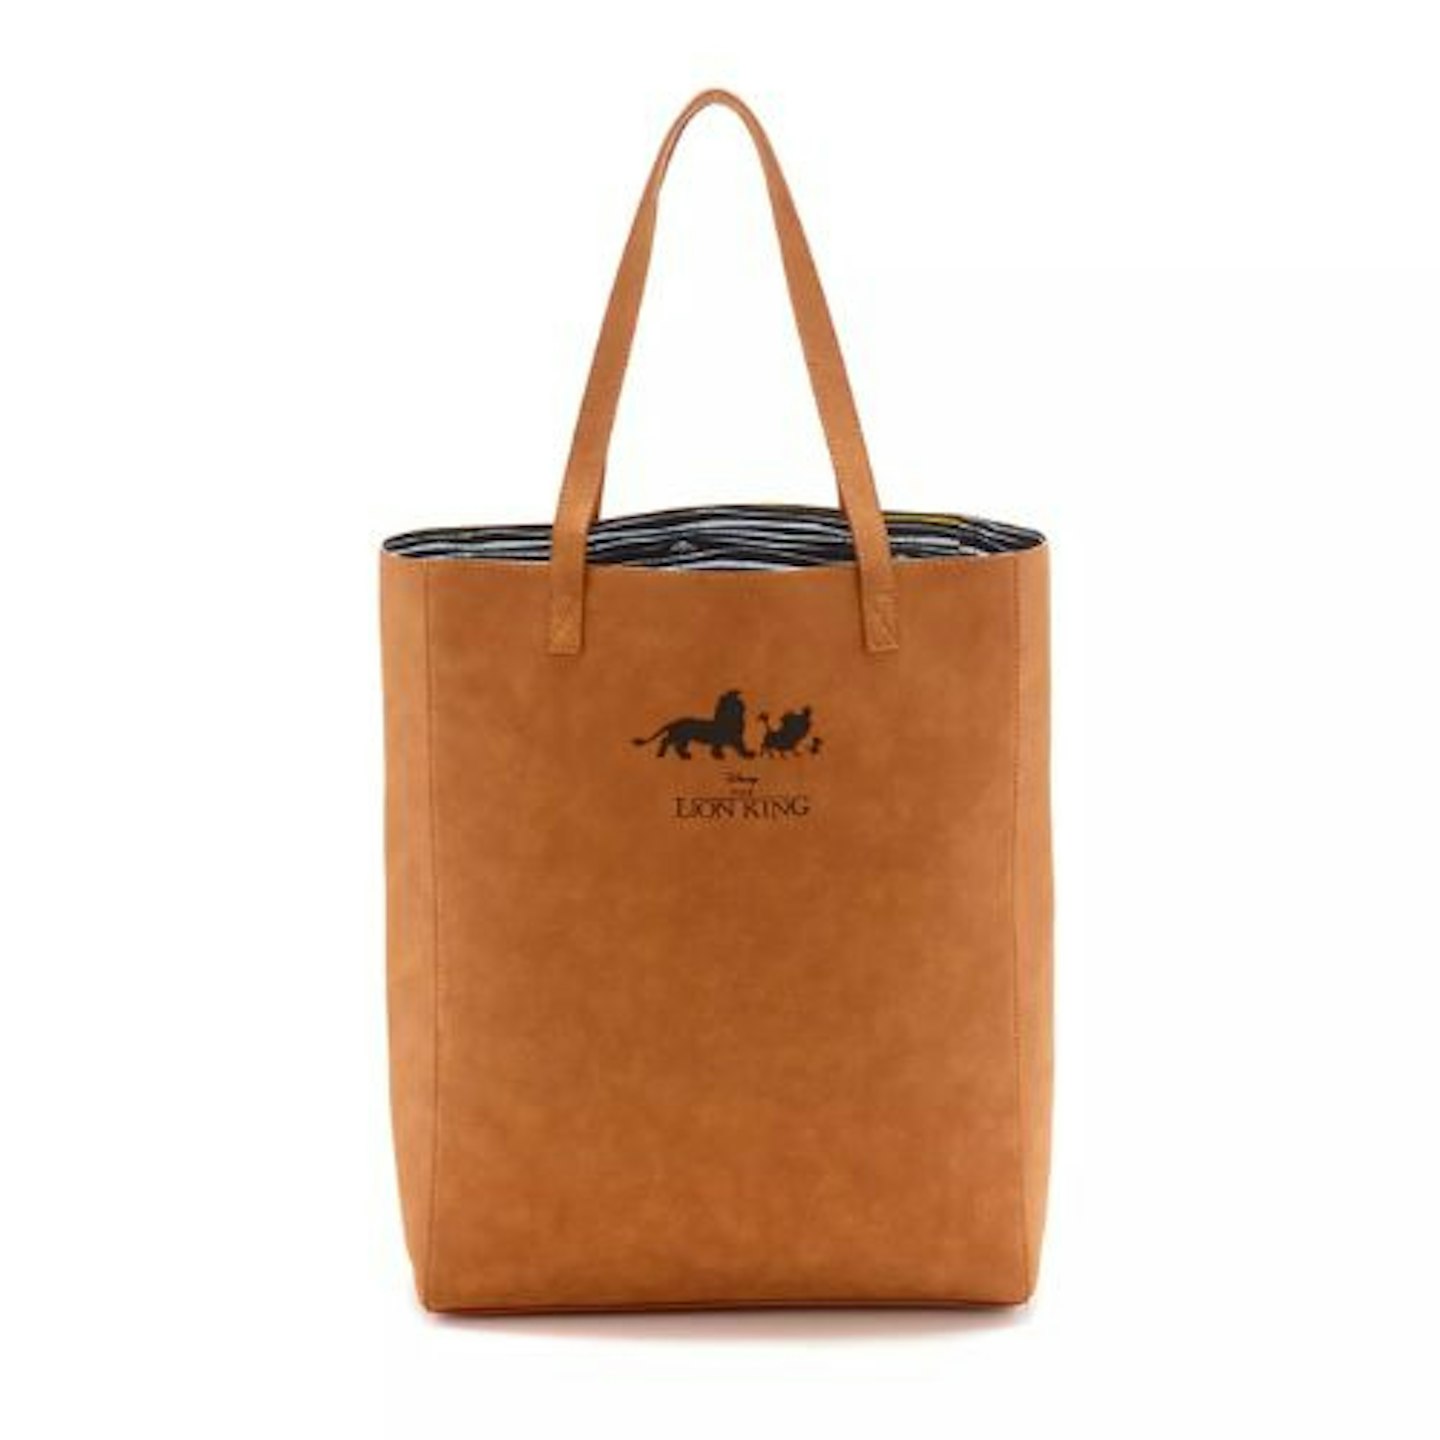 The Lion King Tote Bag